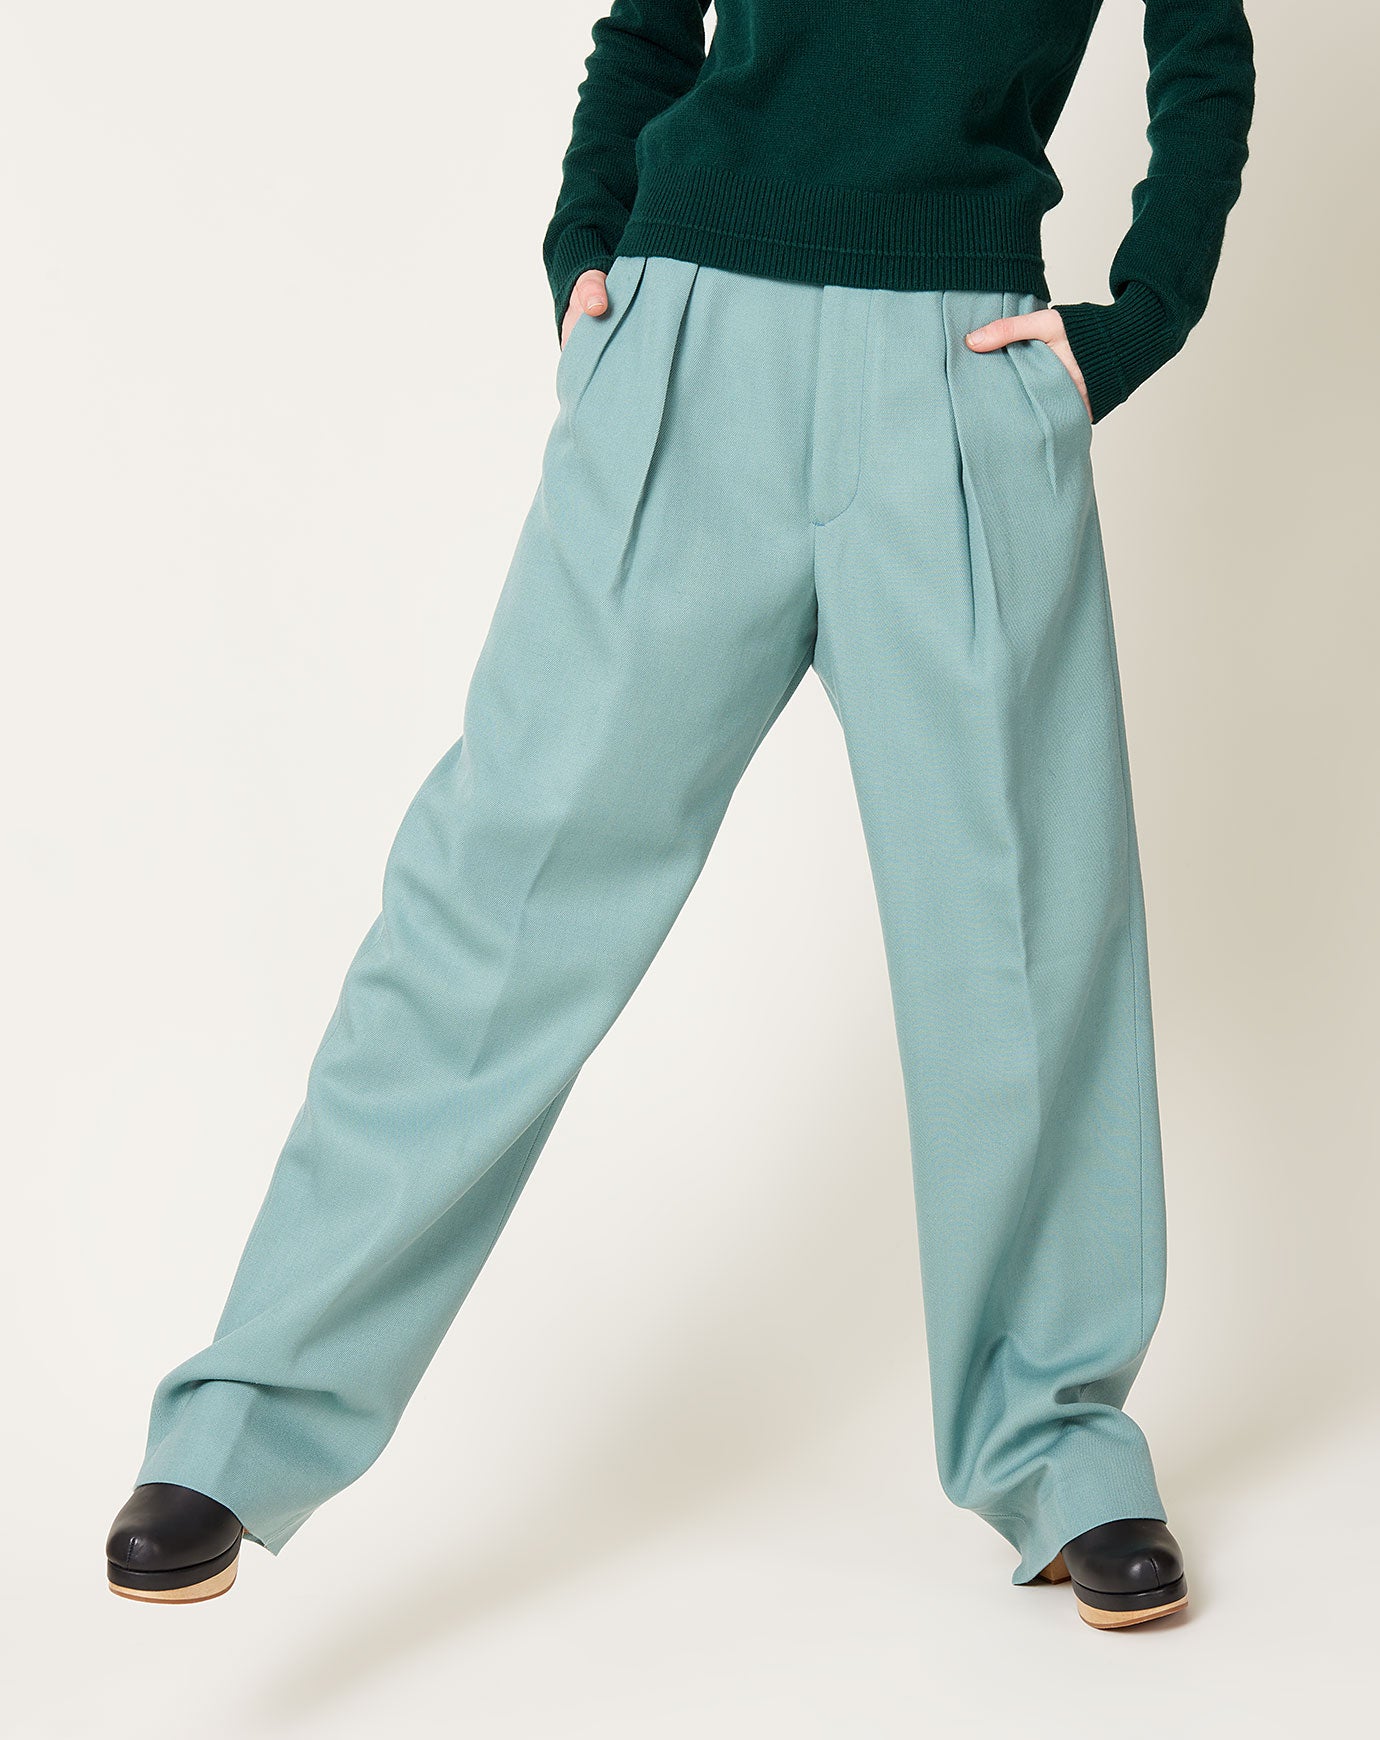 Christian Wijnants Ponza Tailored Trouser in Sage